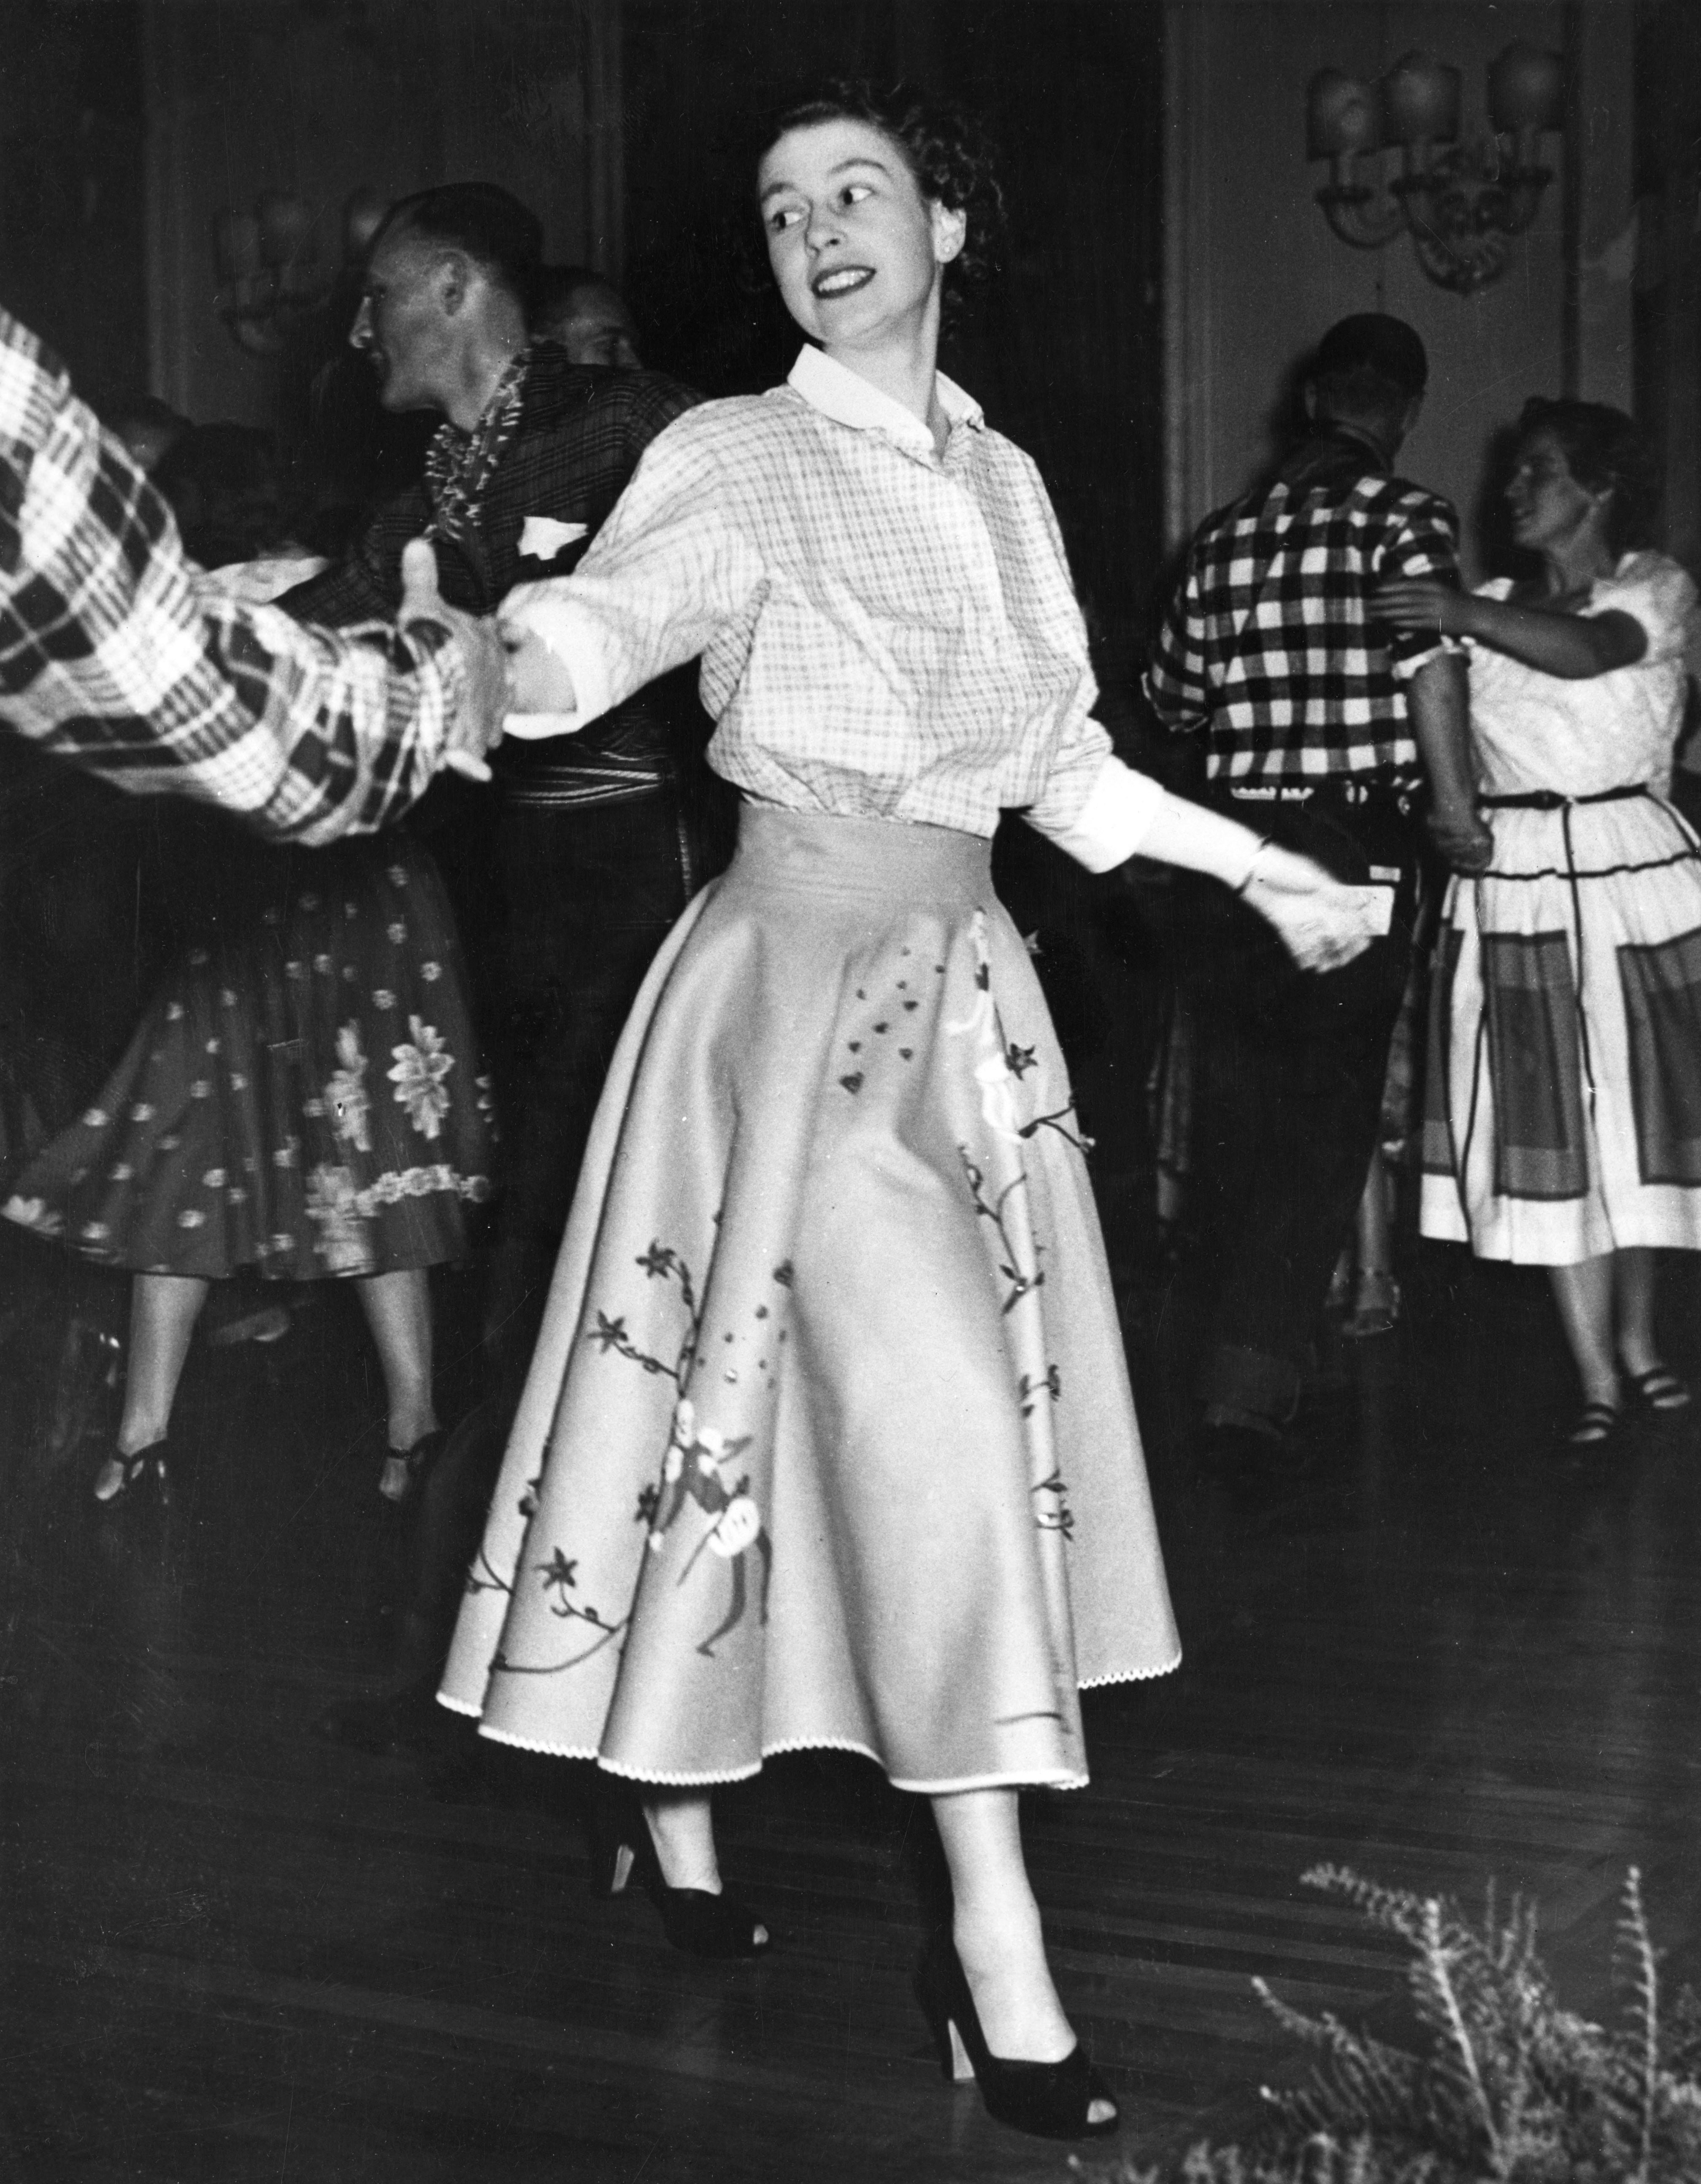 Queen Elizabeth Tribute -  The Queen dancing Princess Elizabeth (Queen to be) dancing a Canadian Square dance in  Ottowa during the Canadian Royal tour in 1951